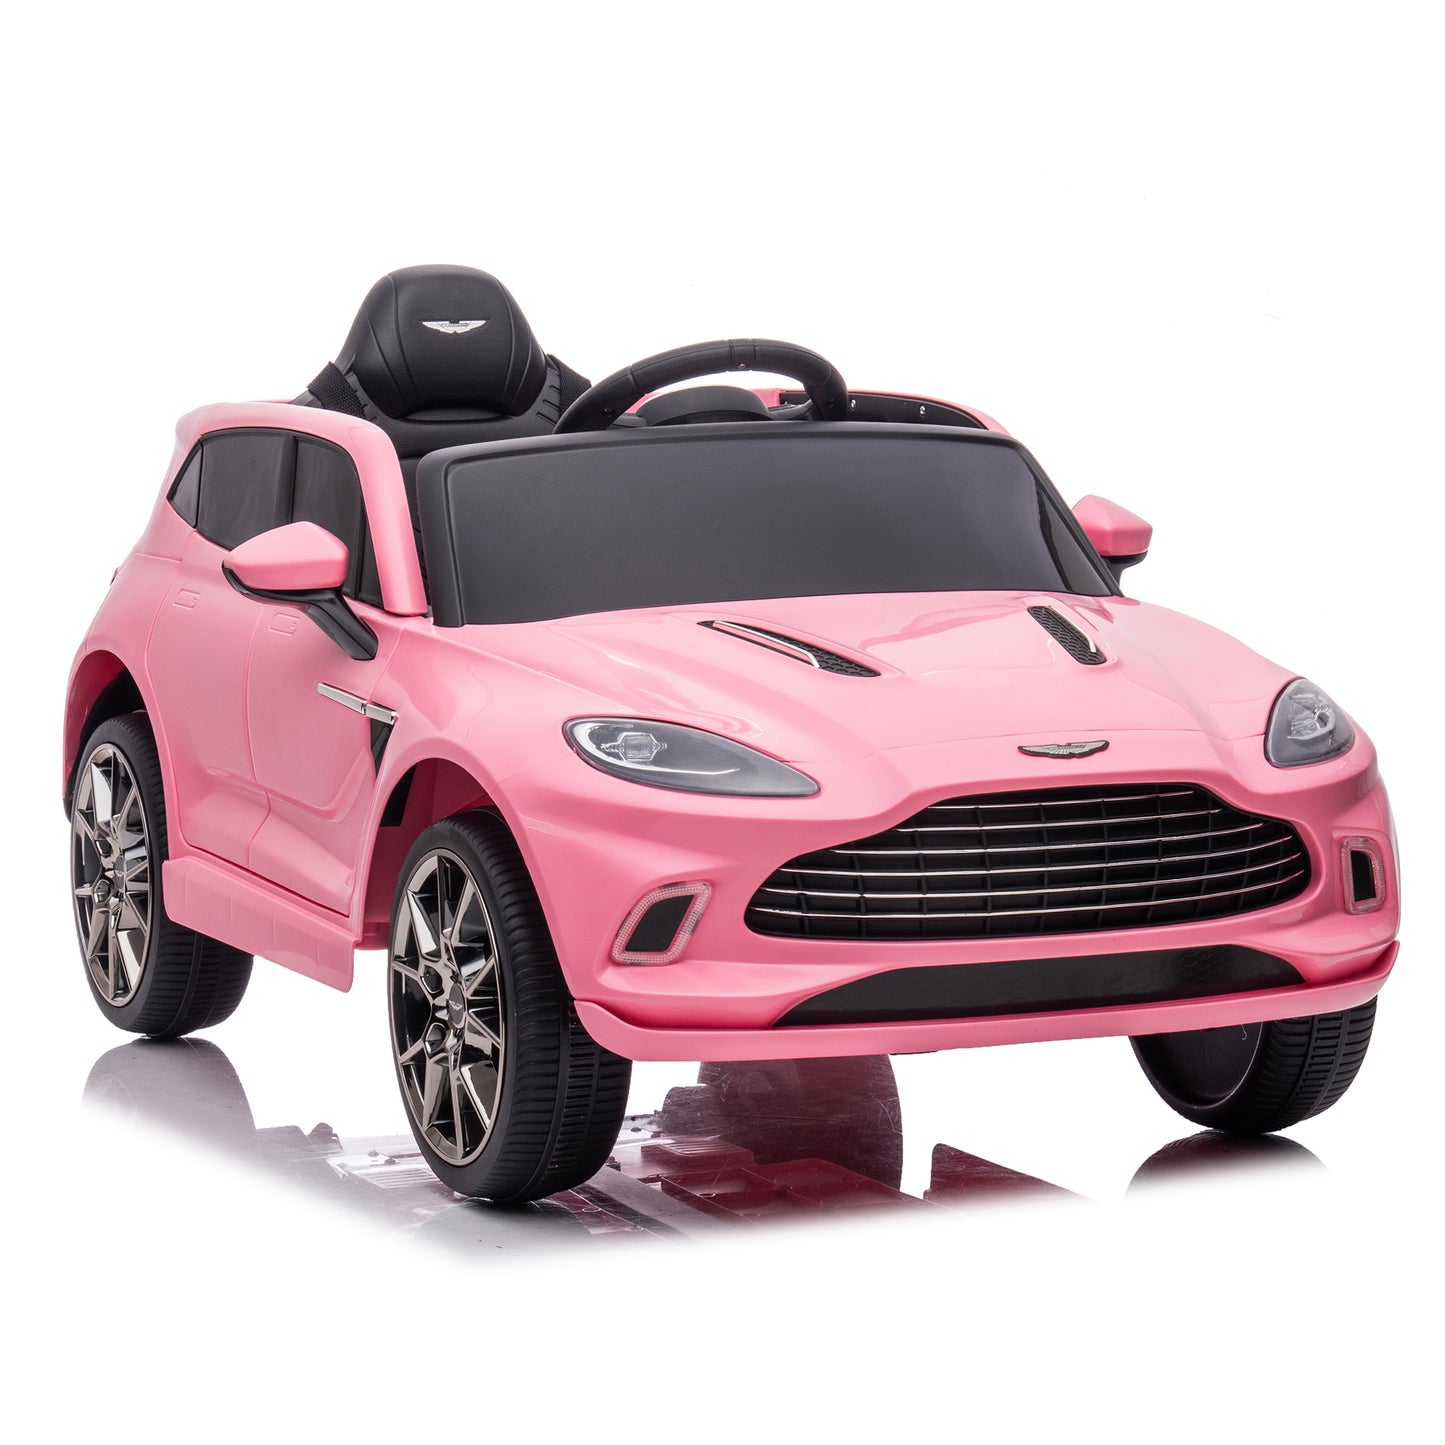 Aston Martin 12V Dual-drive remote control electric Kid Ride On Car, Battery Powered Kids Ride-on Car pink, 4 Wheels Children toys vehicle ,LED Headlights, remote control, music, USB